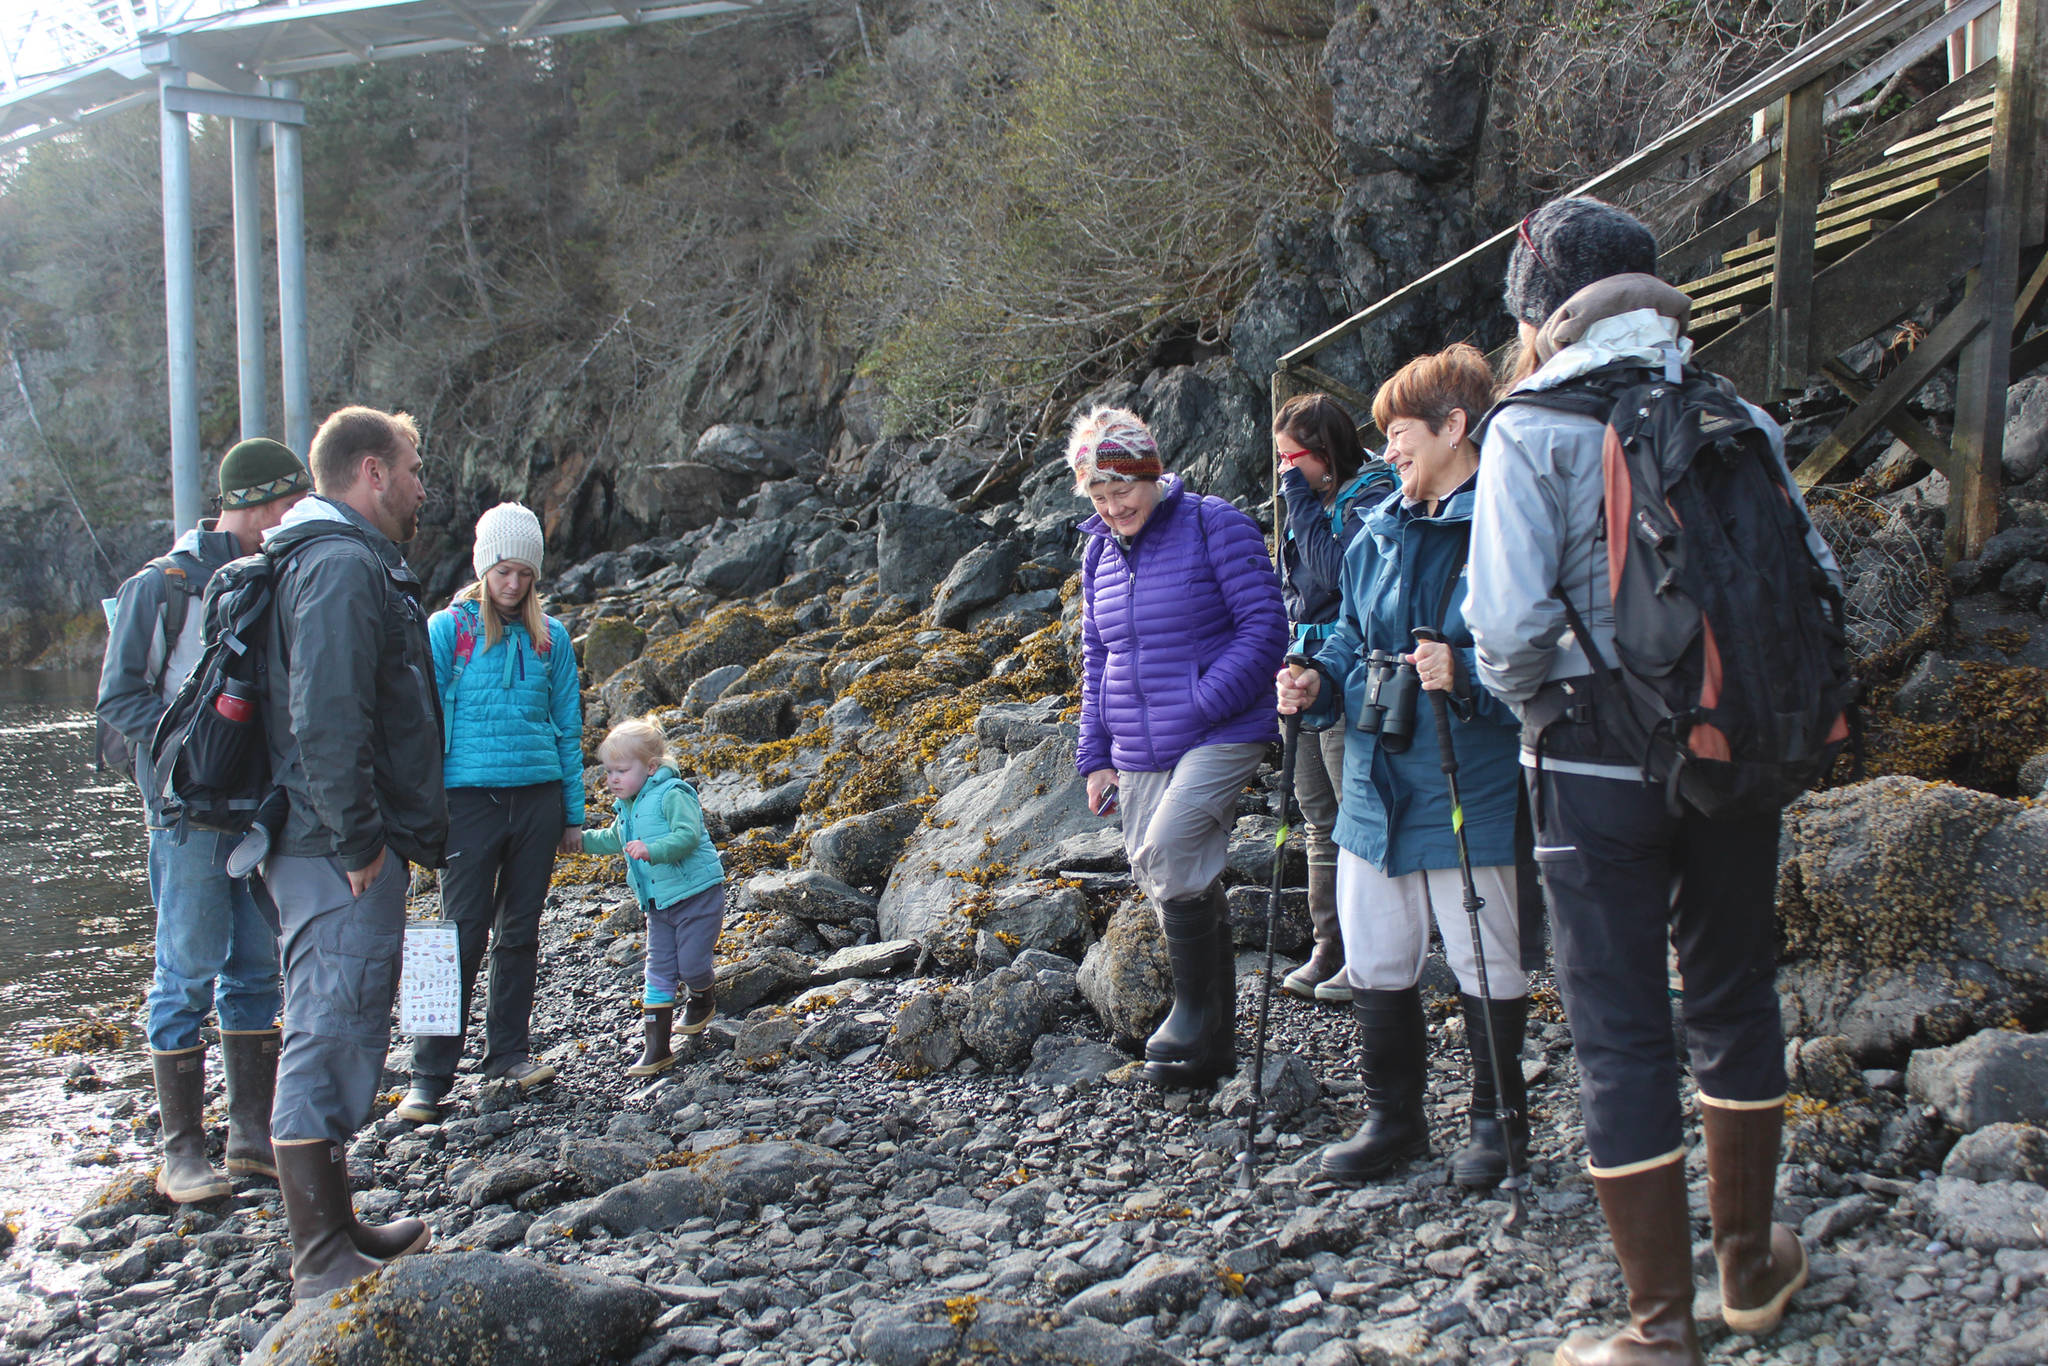 A group of residents prepares to set off down the beach at Peterson Bay during a guided tour Thursday, May 24, 2018 near Homer, Alaska. (Photo by Megan Pacer/Homer News)